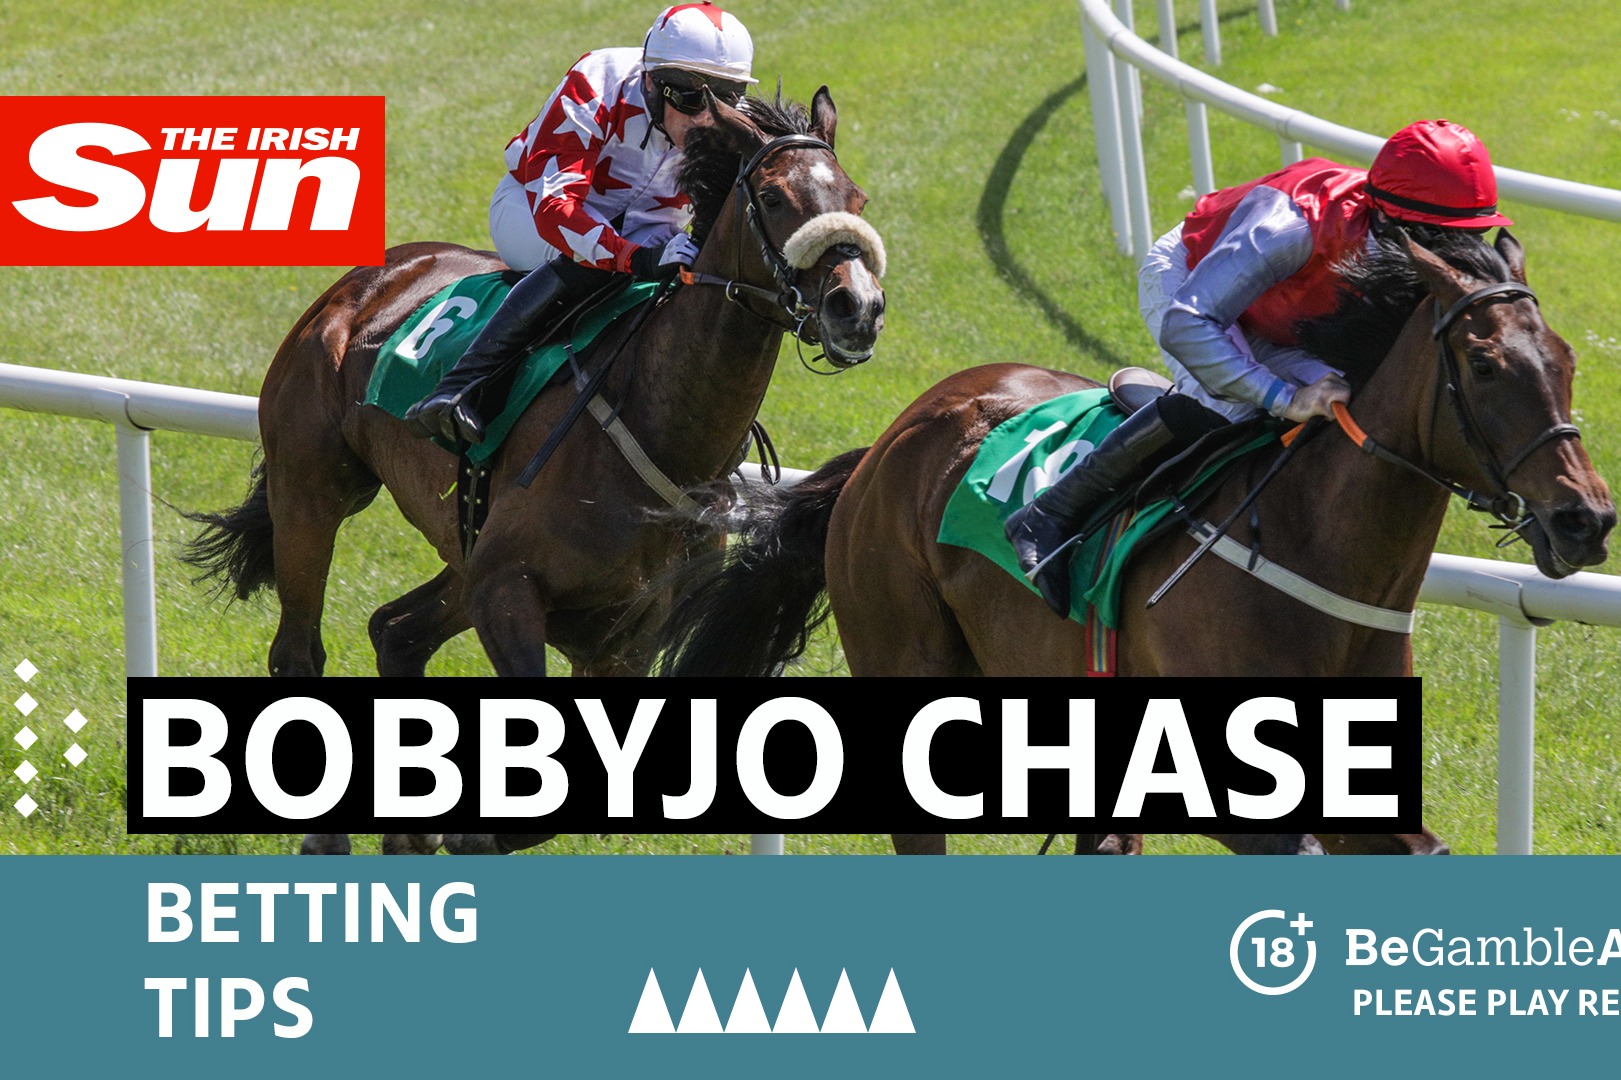 Bobbyjo Chase free bets and best offers for horse racing this weekend